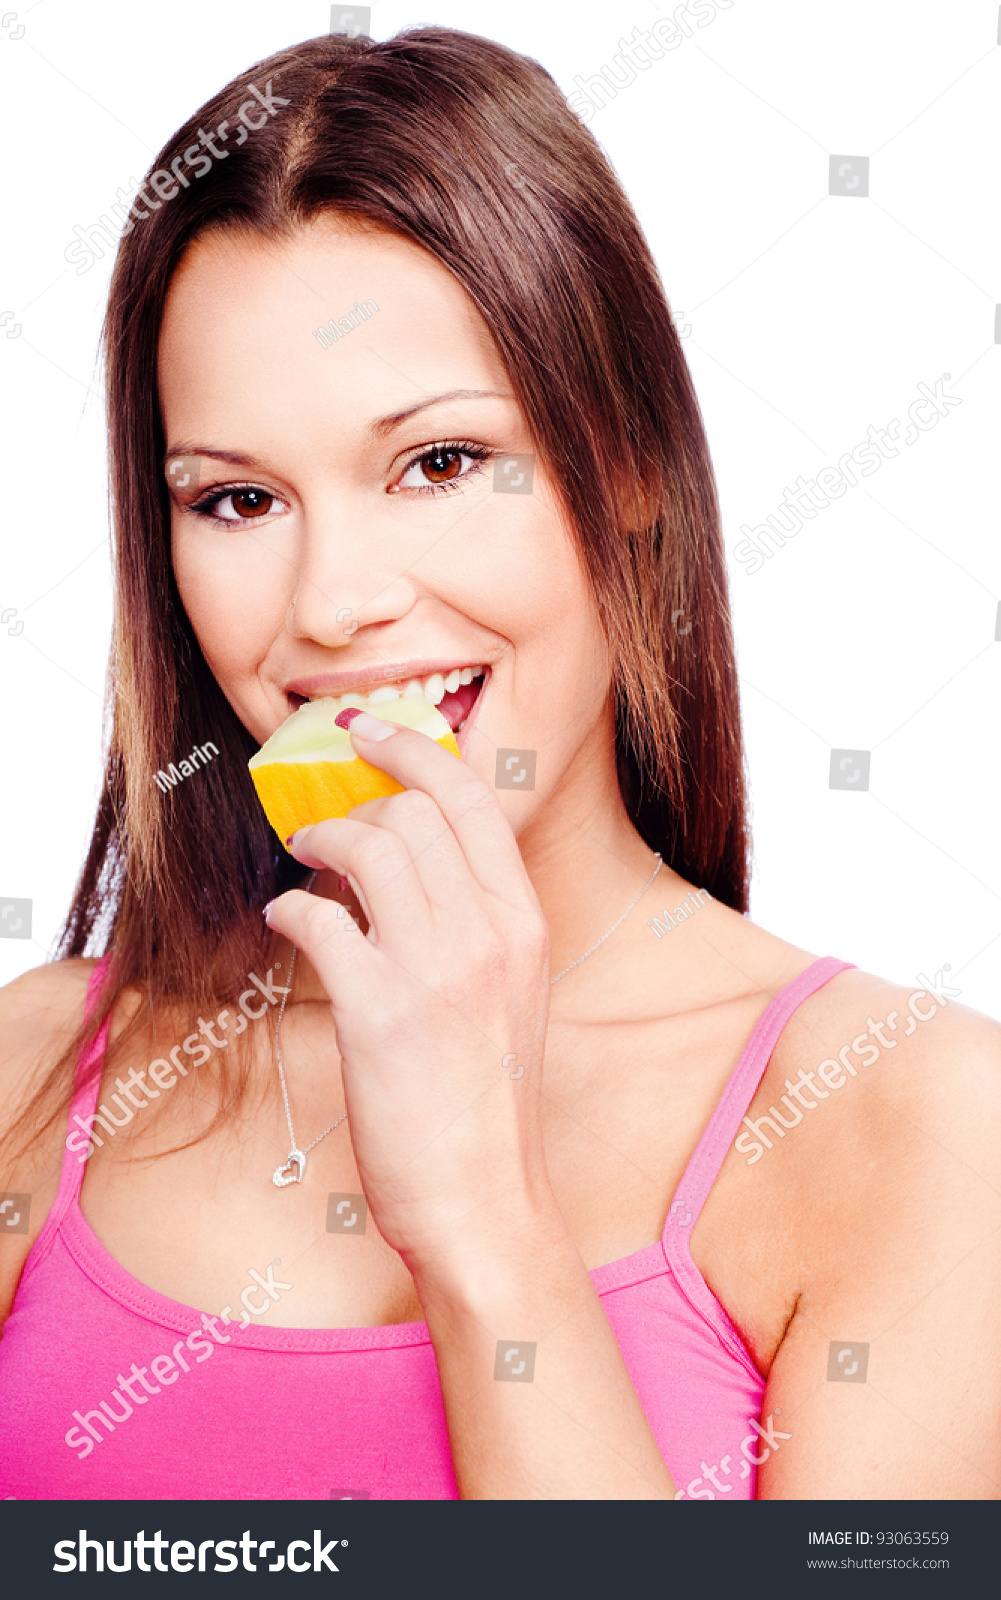 Young woman eating slice of yellow melon, isolated on white #93063559